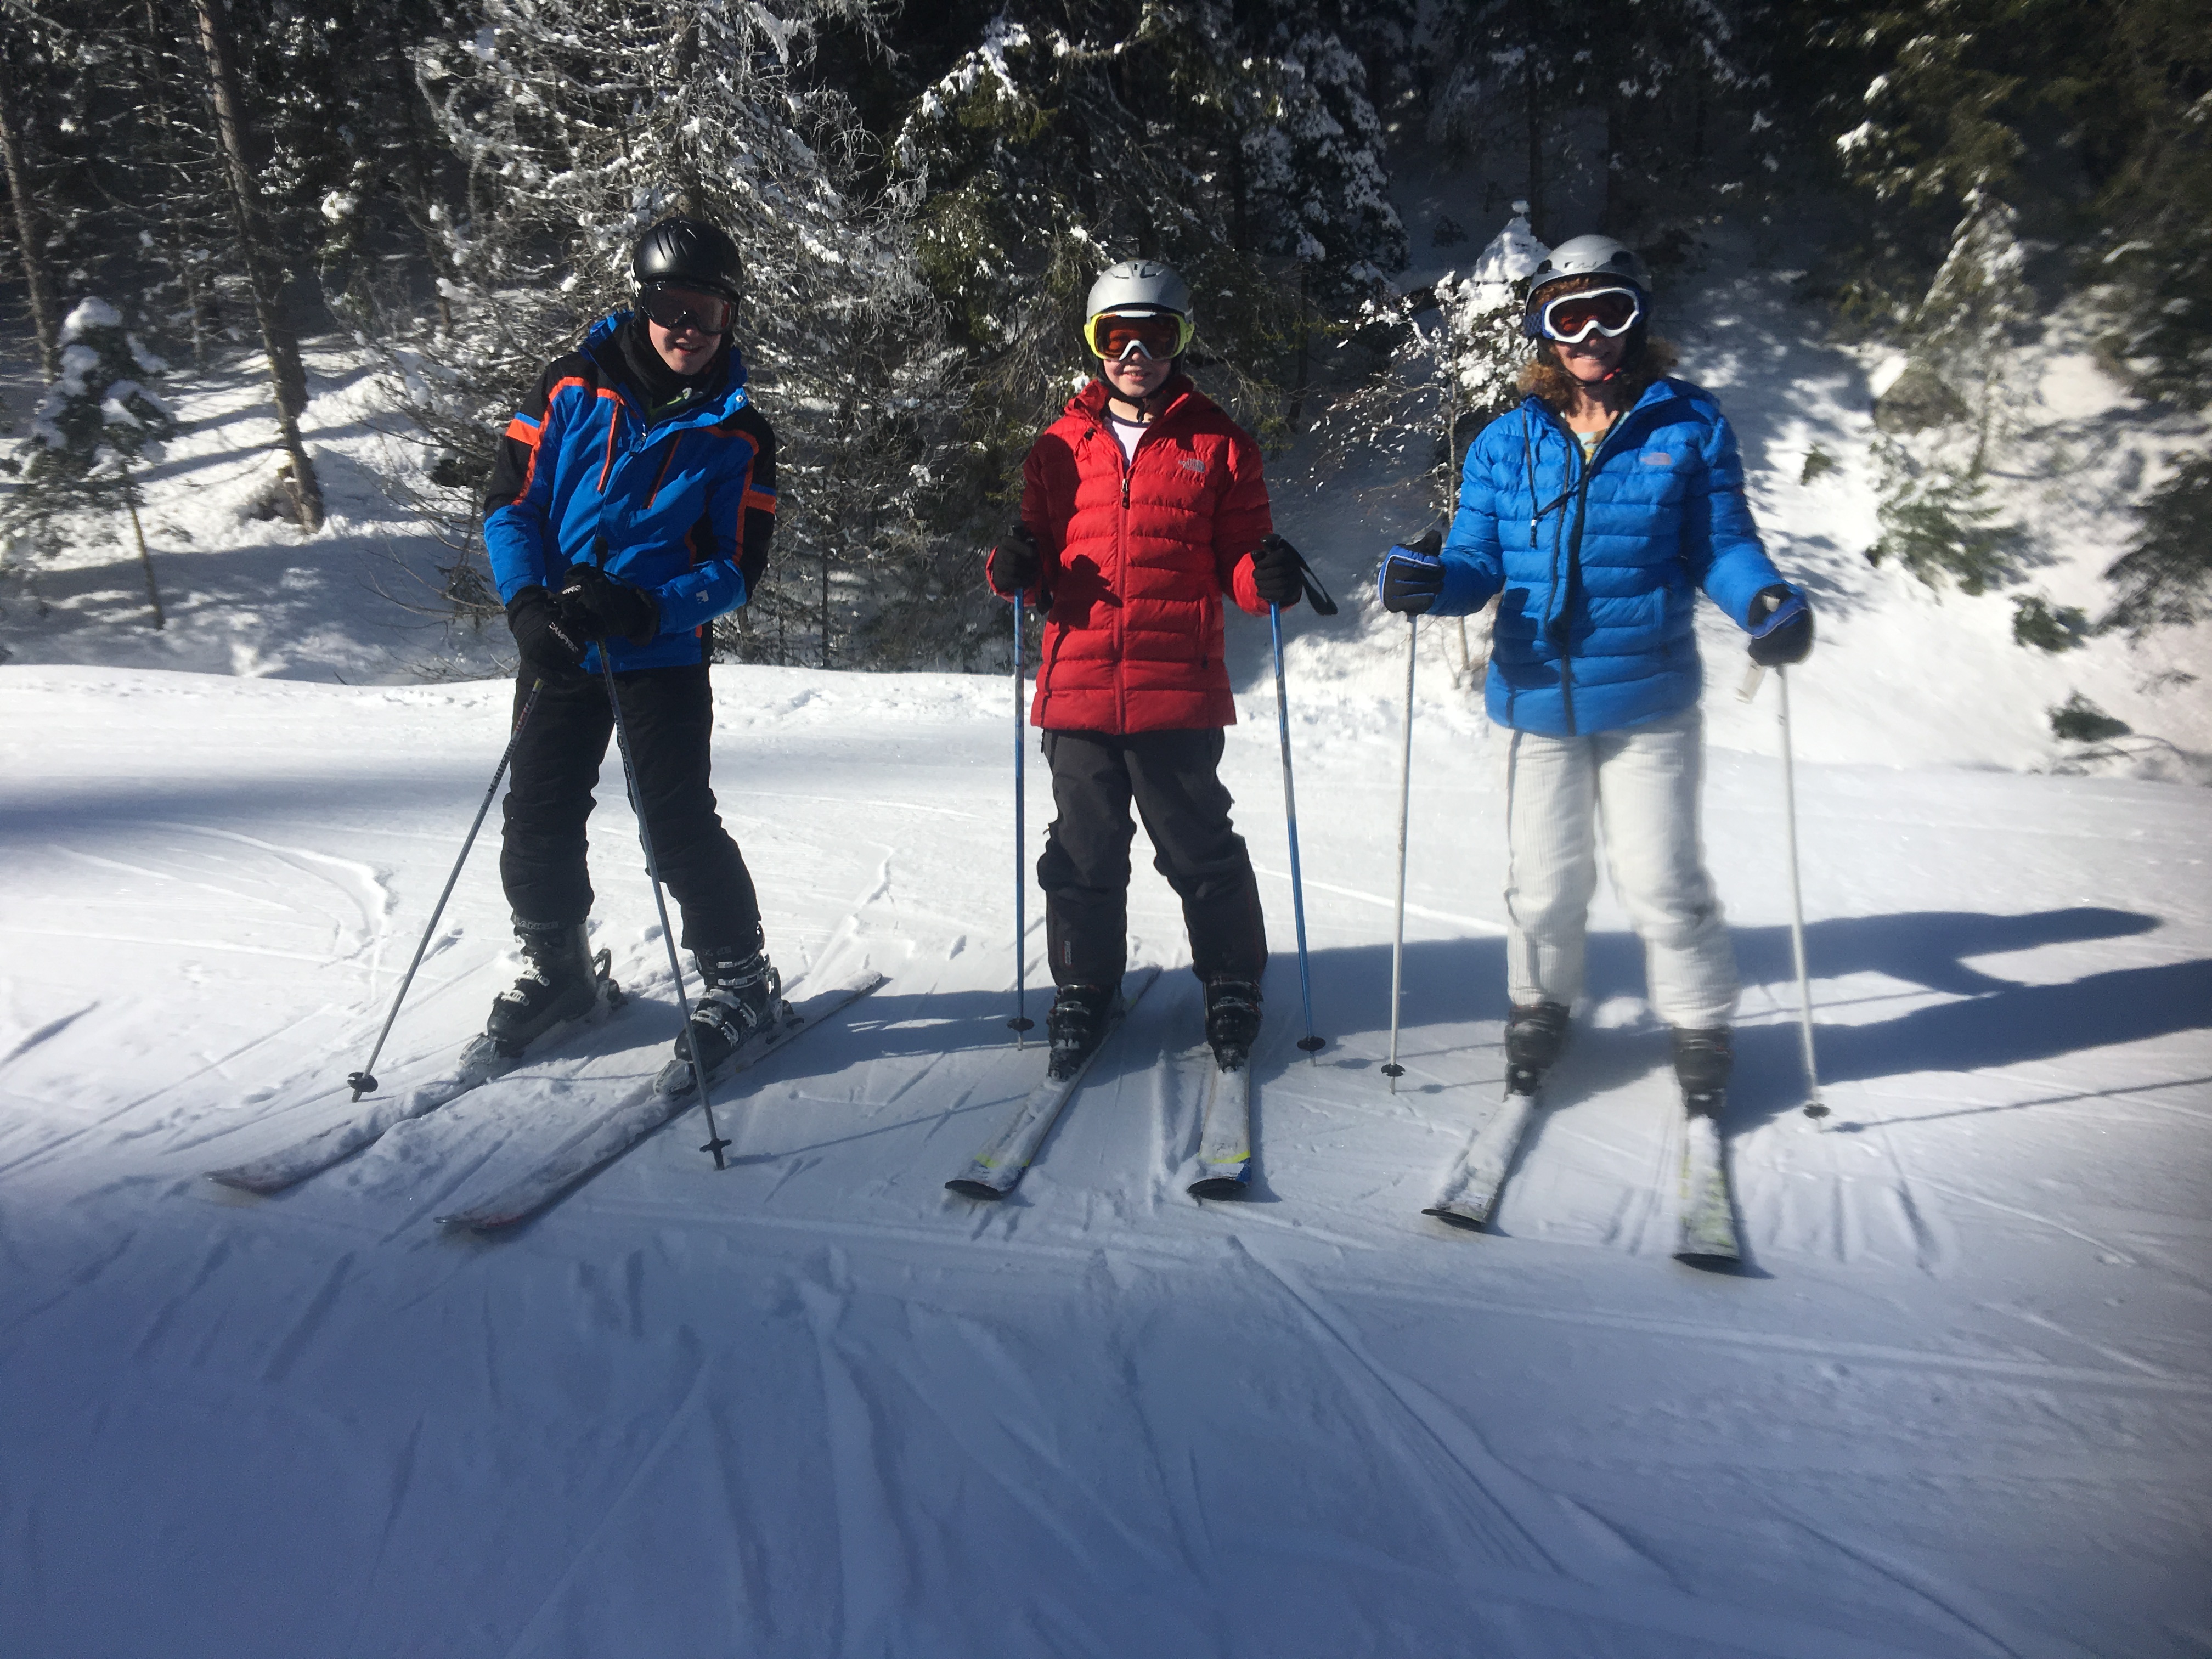 ski lessons - Travel Suggestions